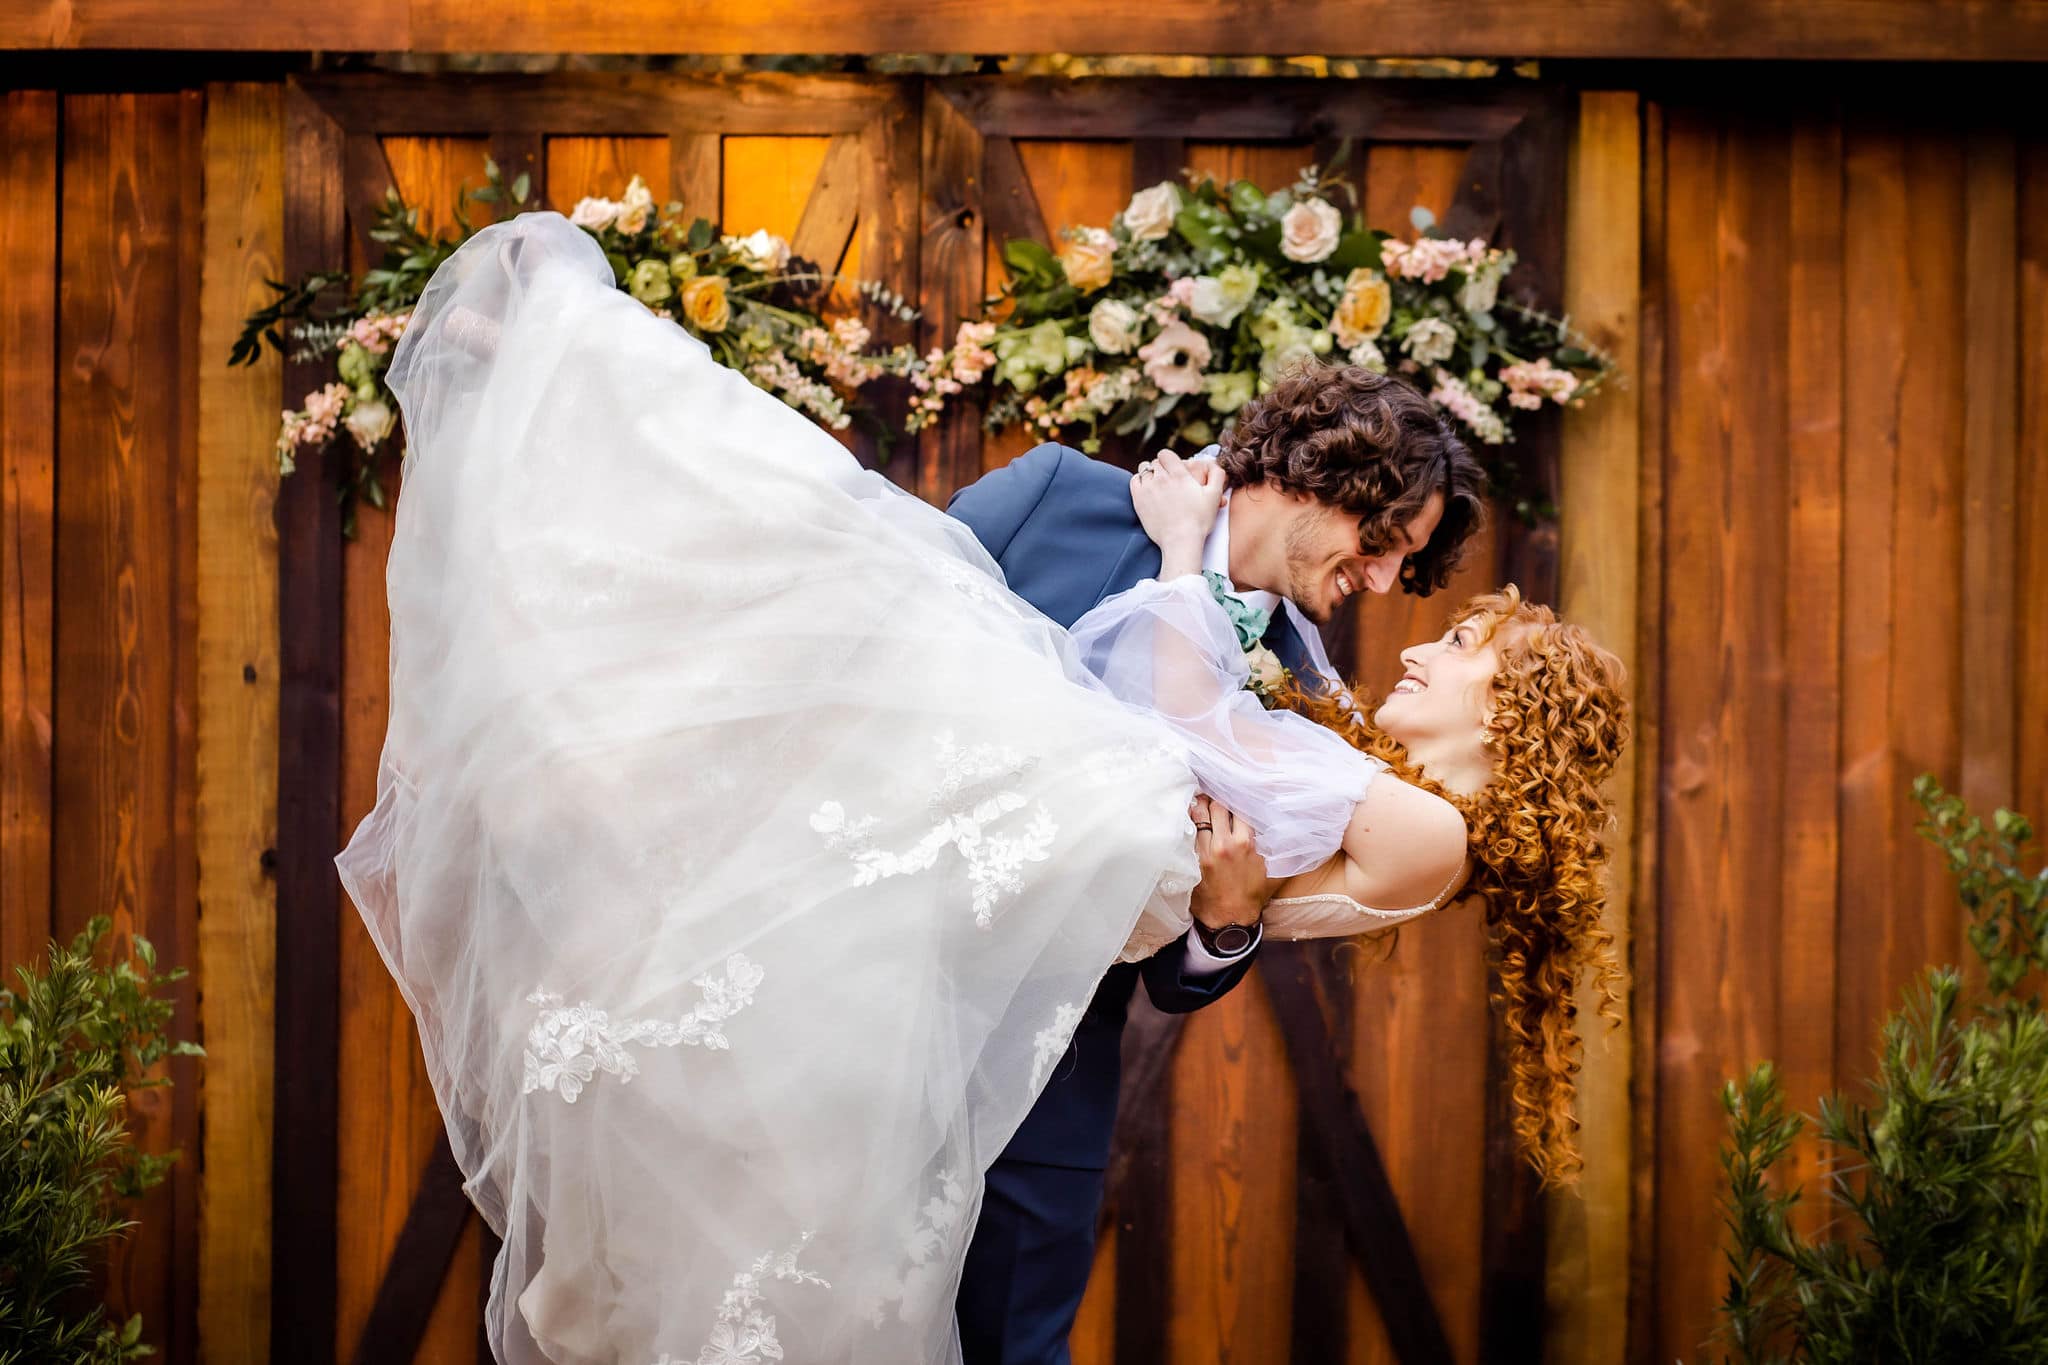 bride being dipped down by groom outside in front of barn doors with hanging floral arrangements attached to them